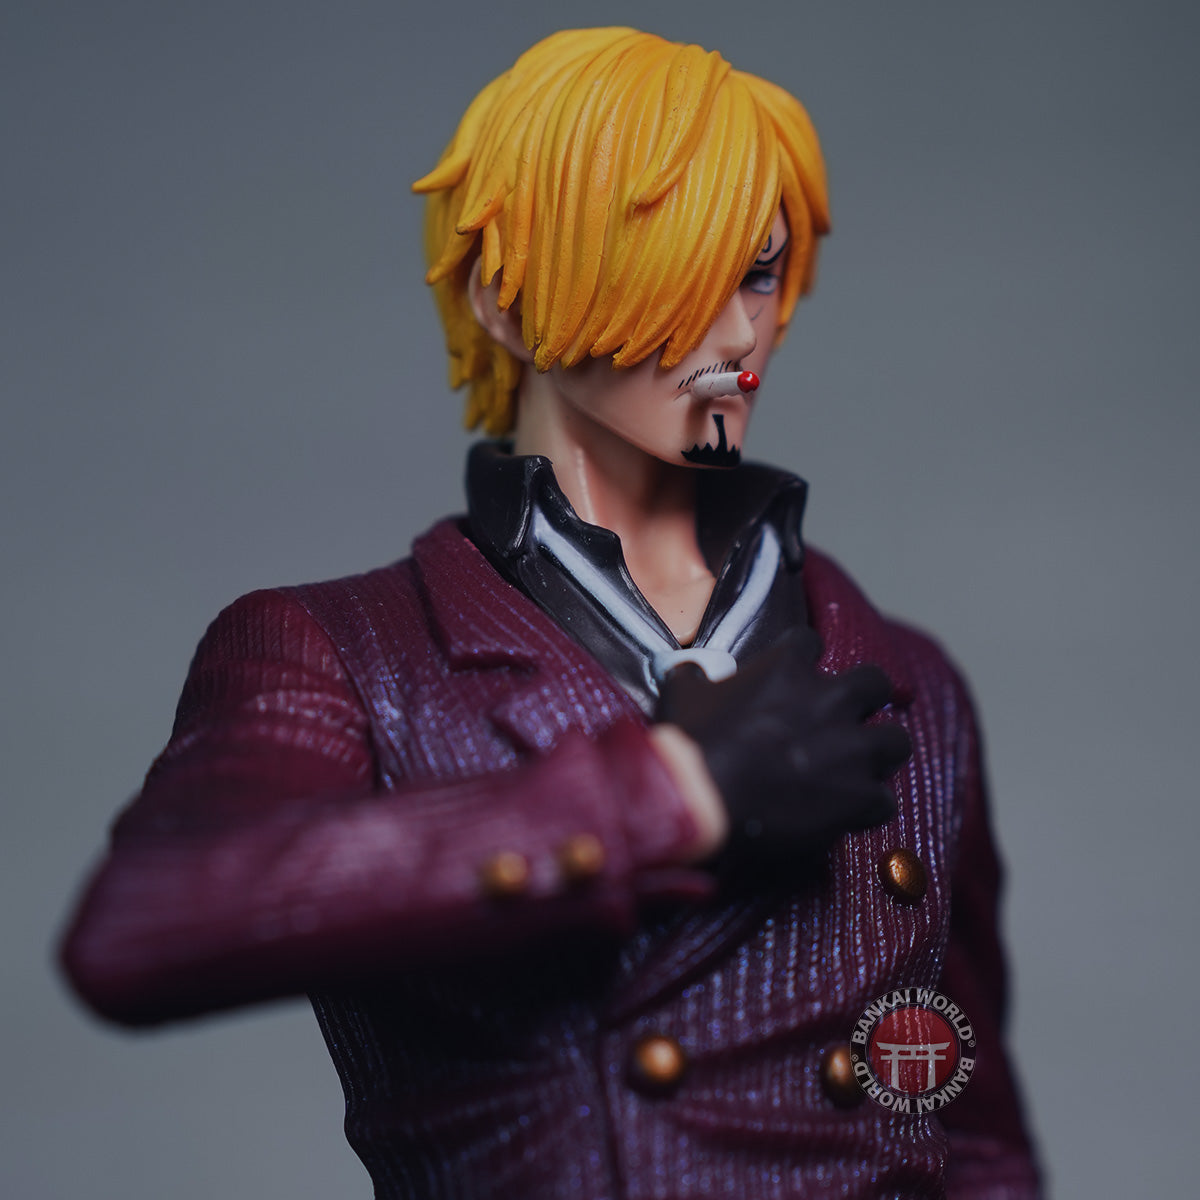 Sanji Fighting Pose With Blue Flames Lighting Action Figure